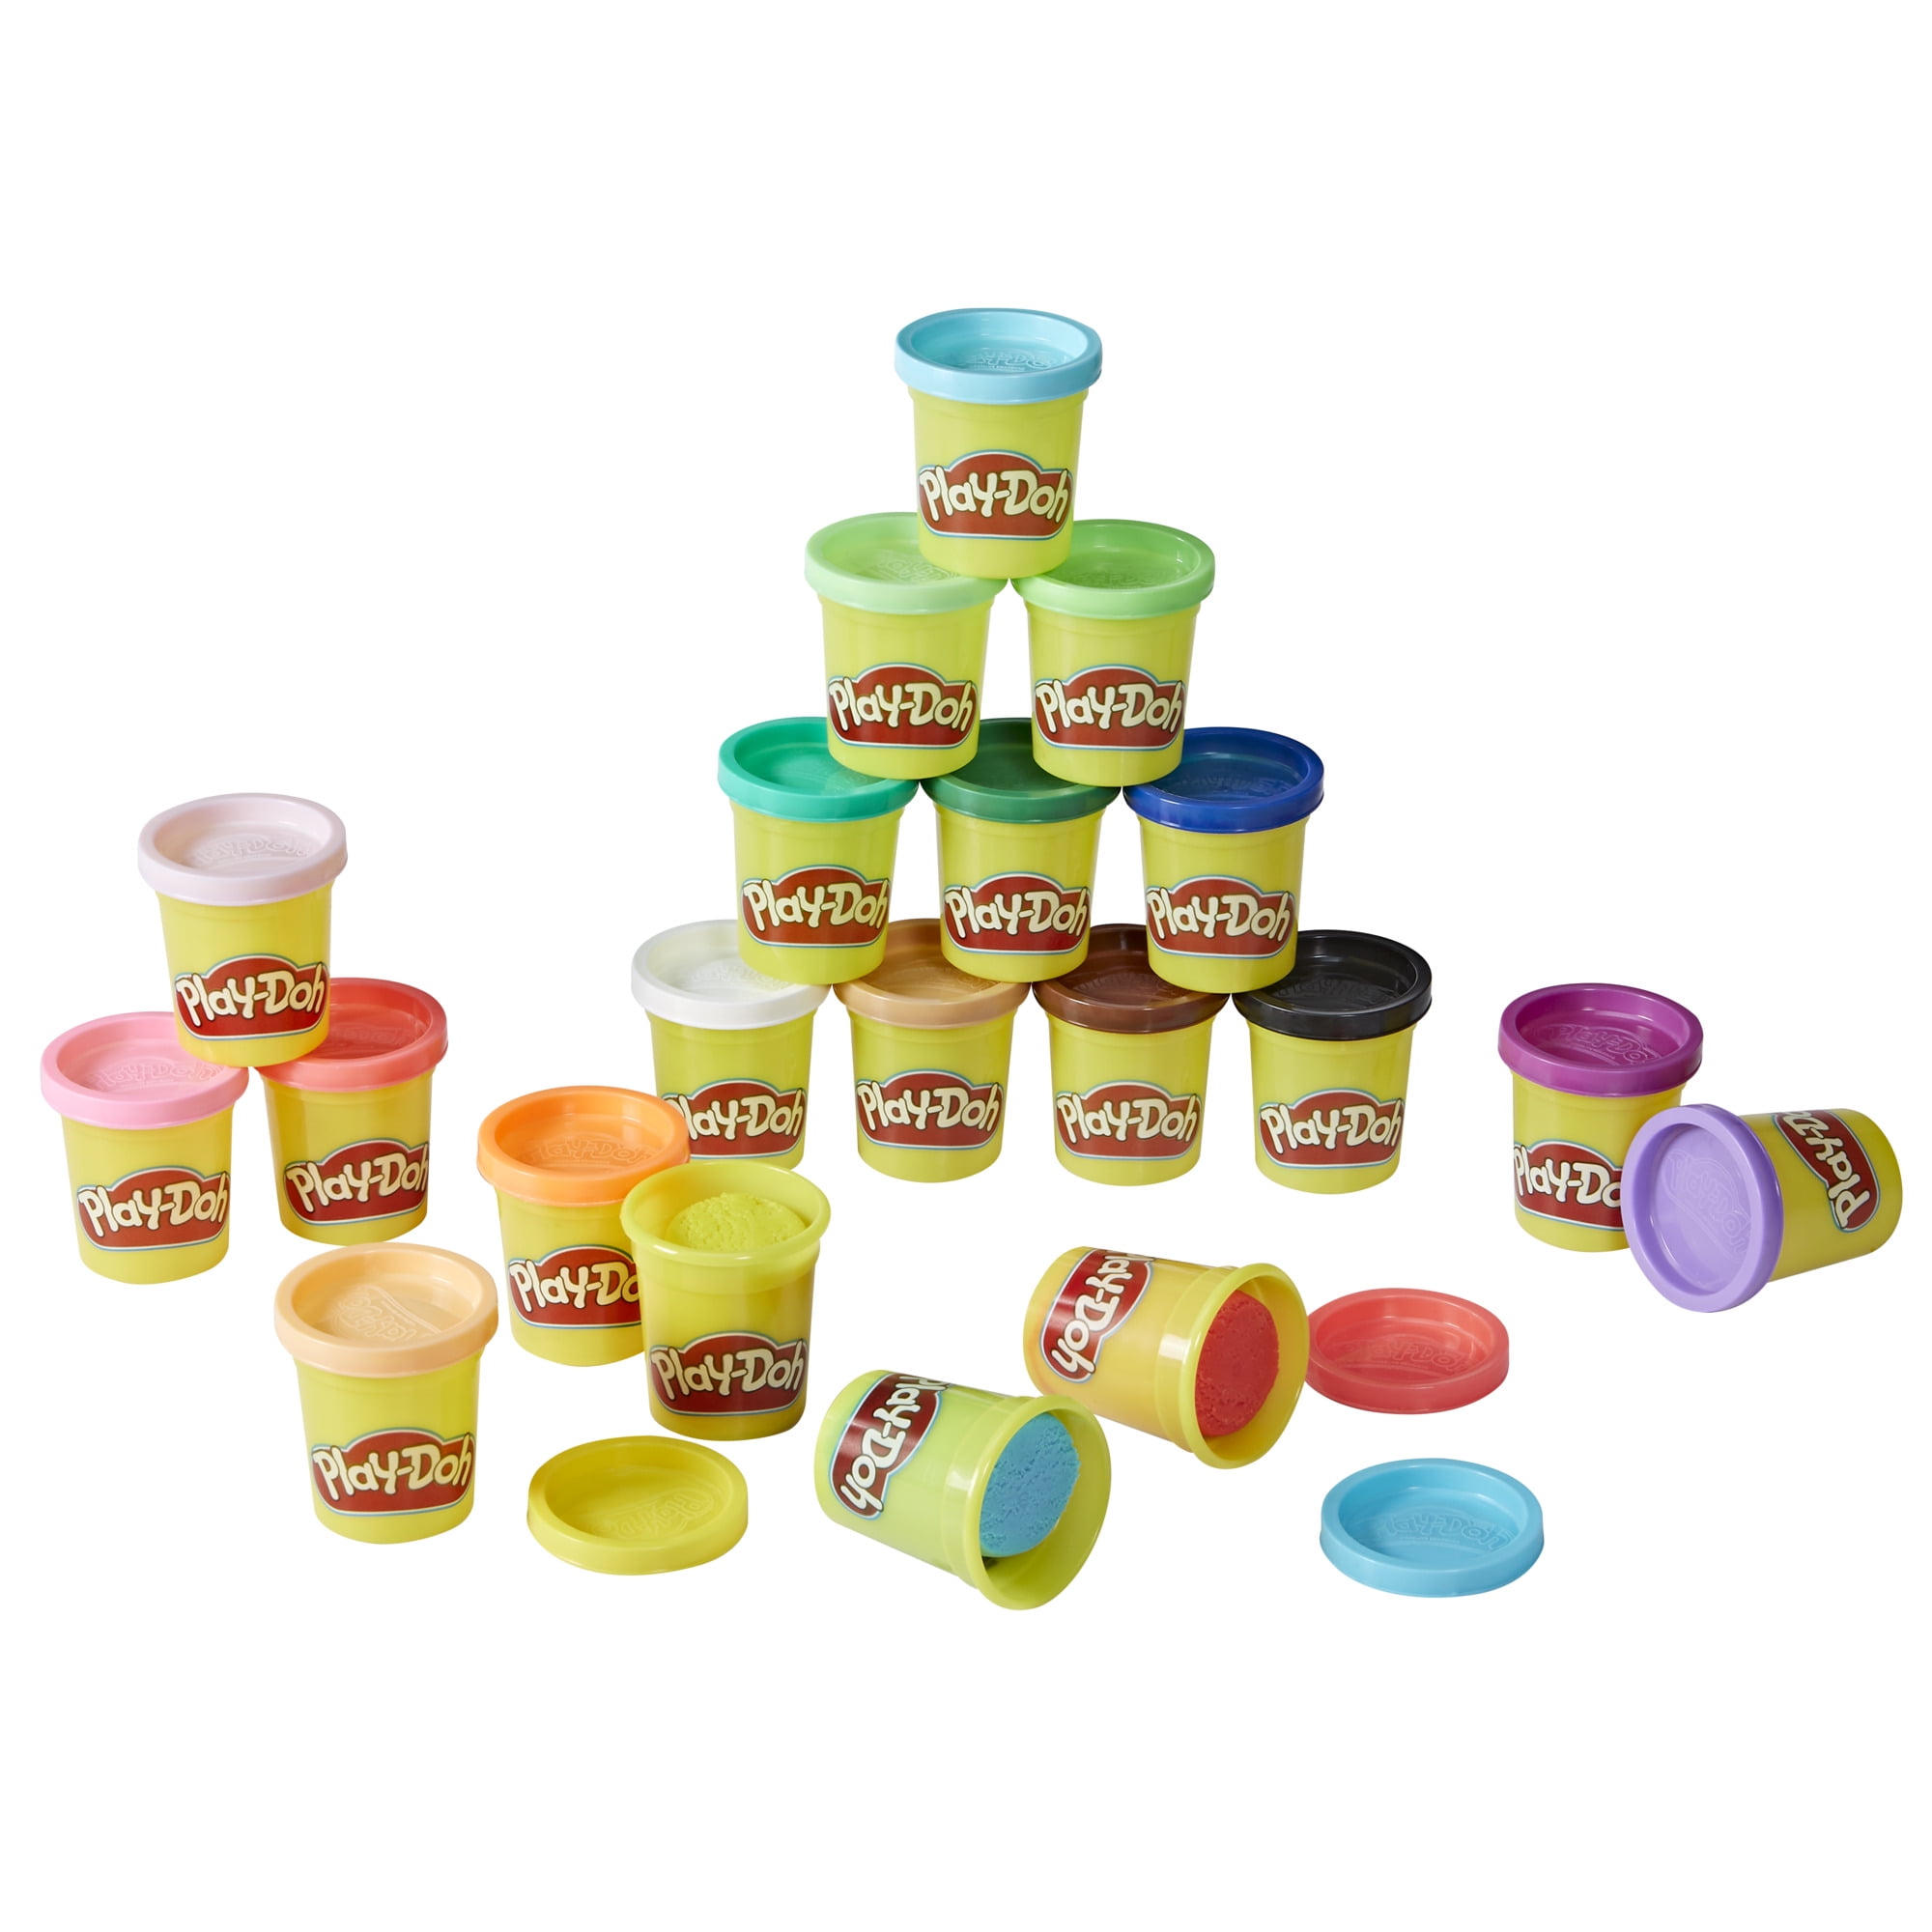 Play-Doh Modeling Compound Multicolor Magic Value 20-Pack, Non-Toxic